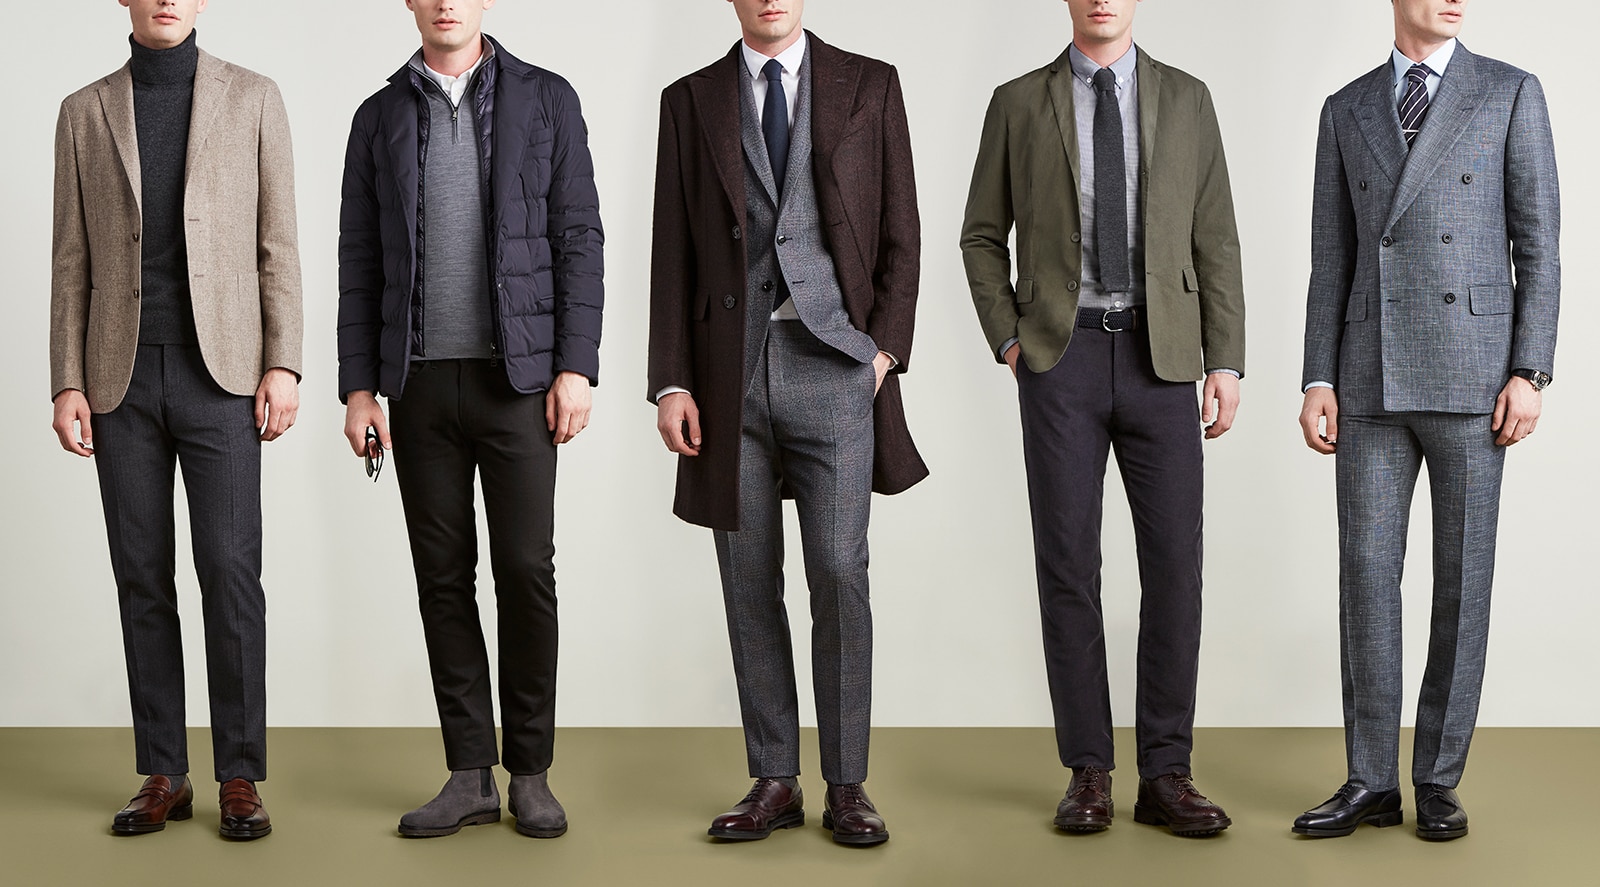 Five Neat Ways To Dress For Work | The Journal | MR PORTER